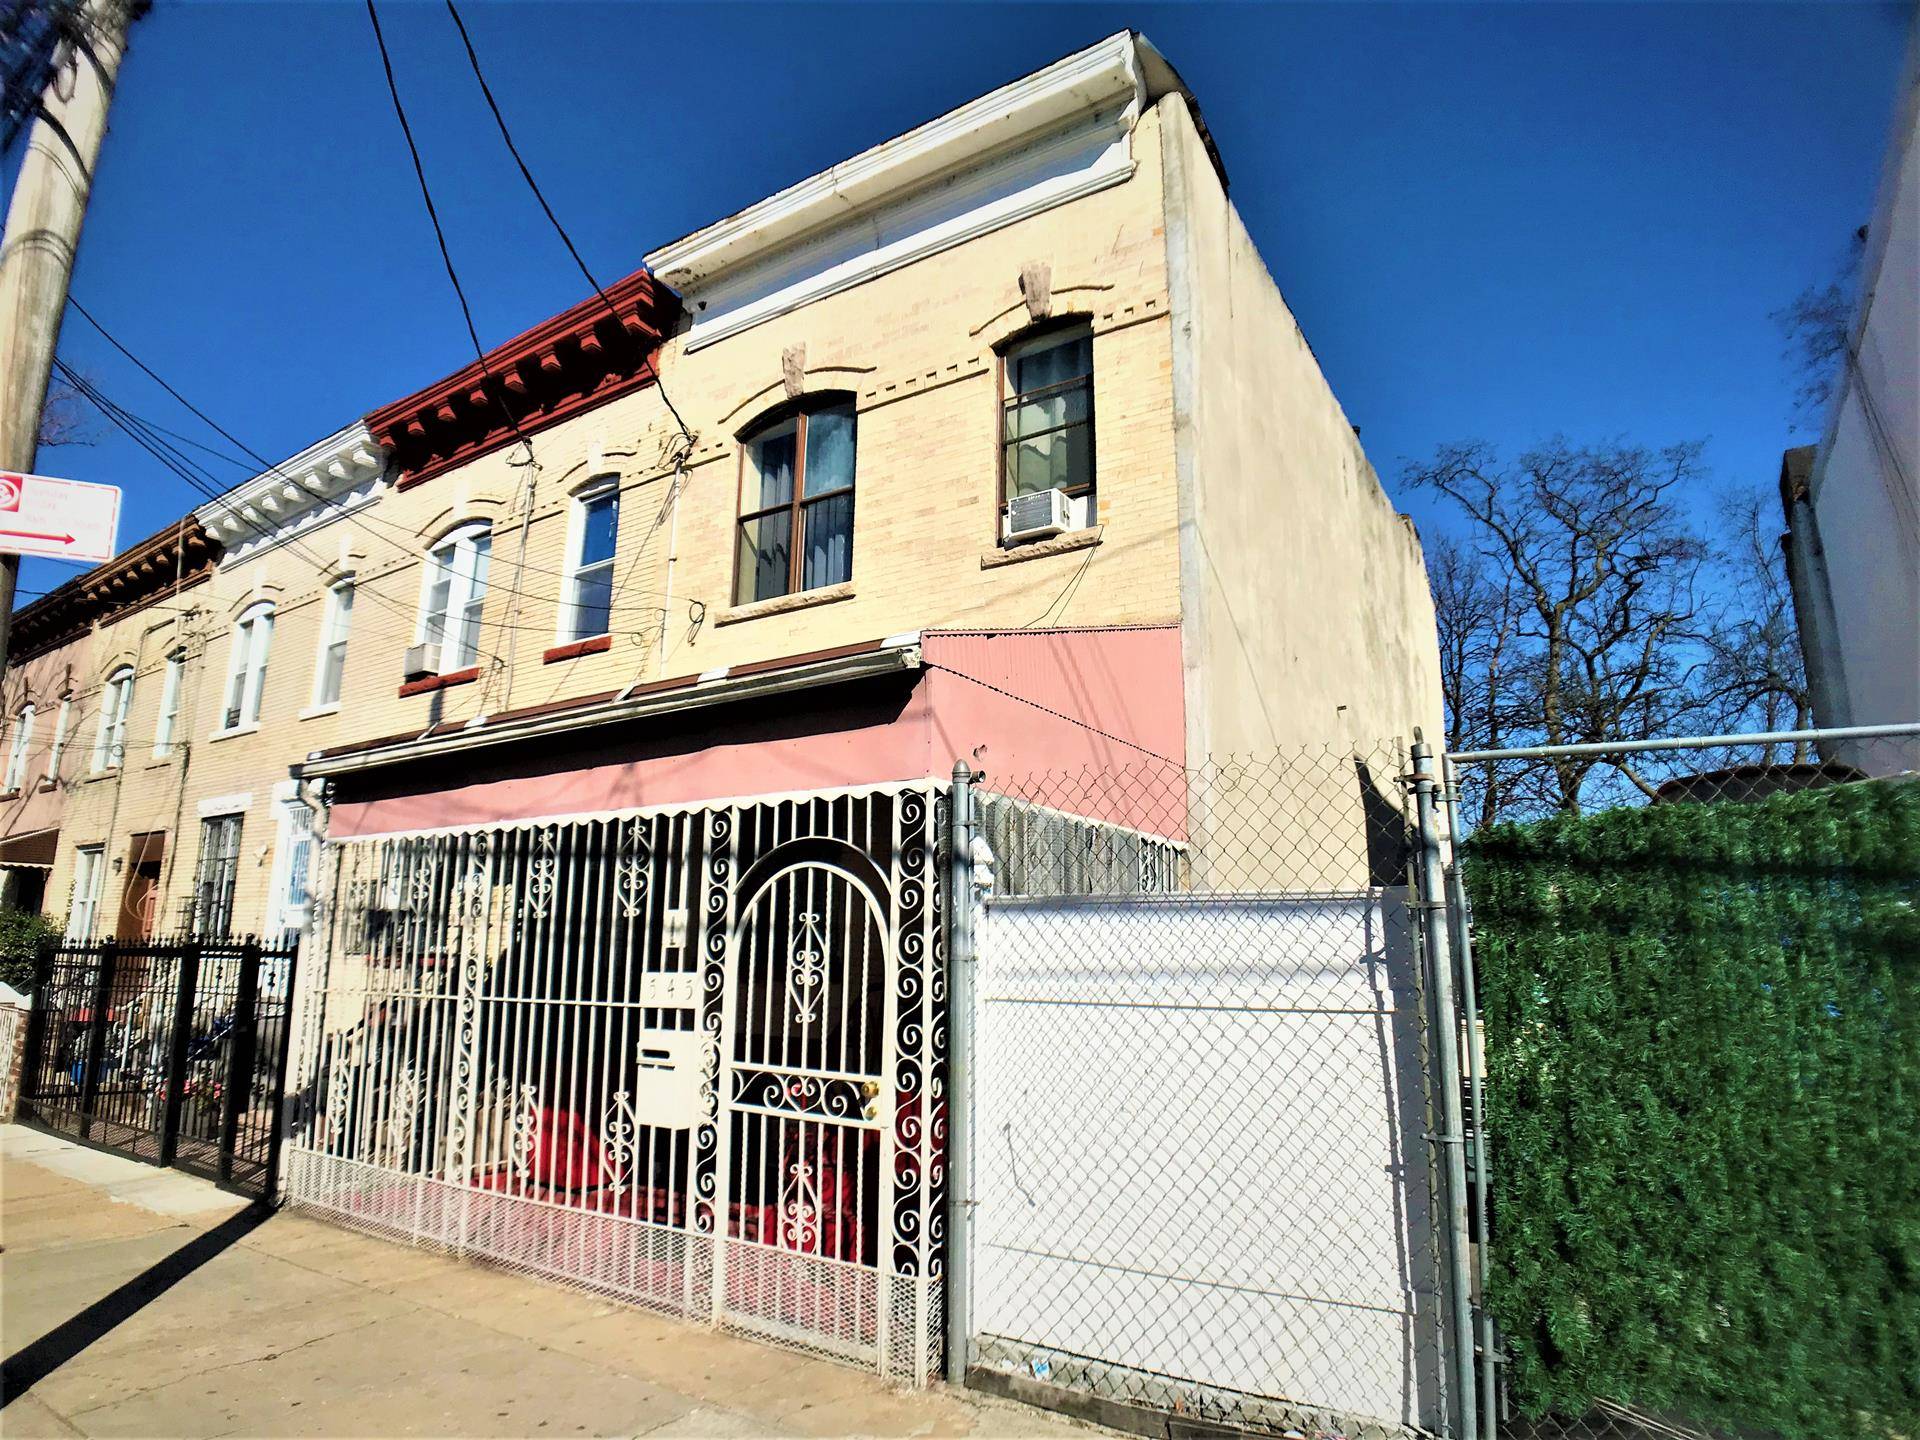 Welcome to 545 Van Siclen Avenue, located in East New York.